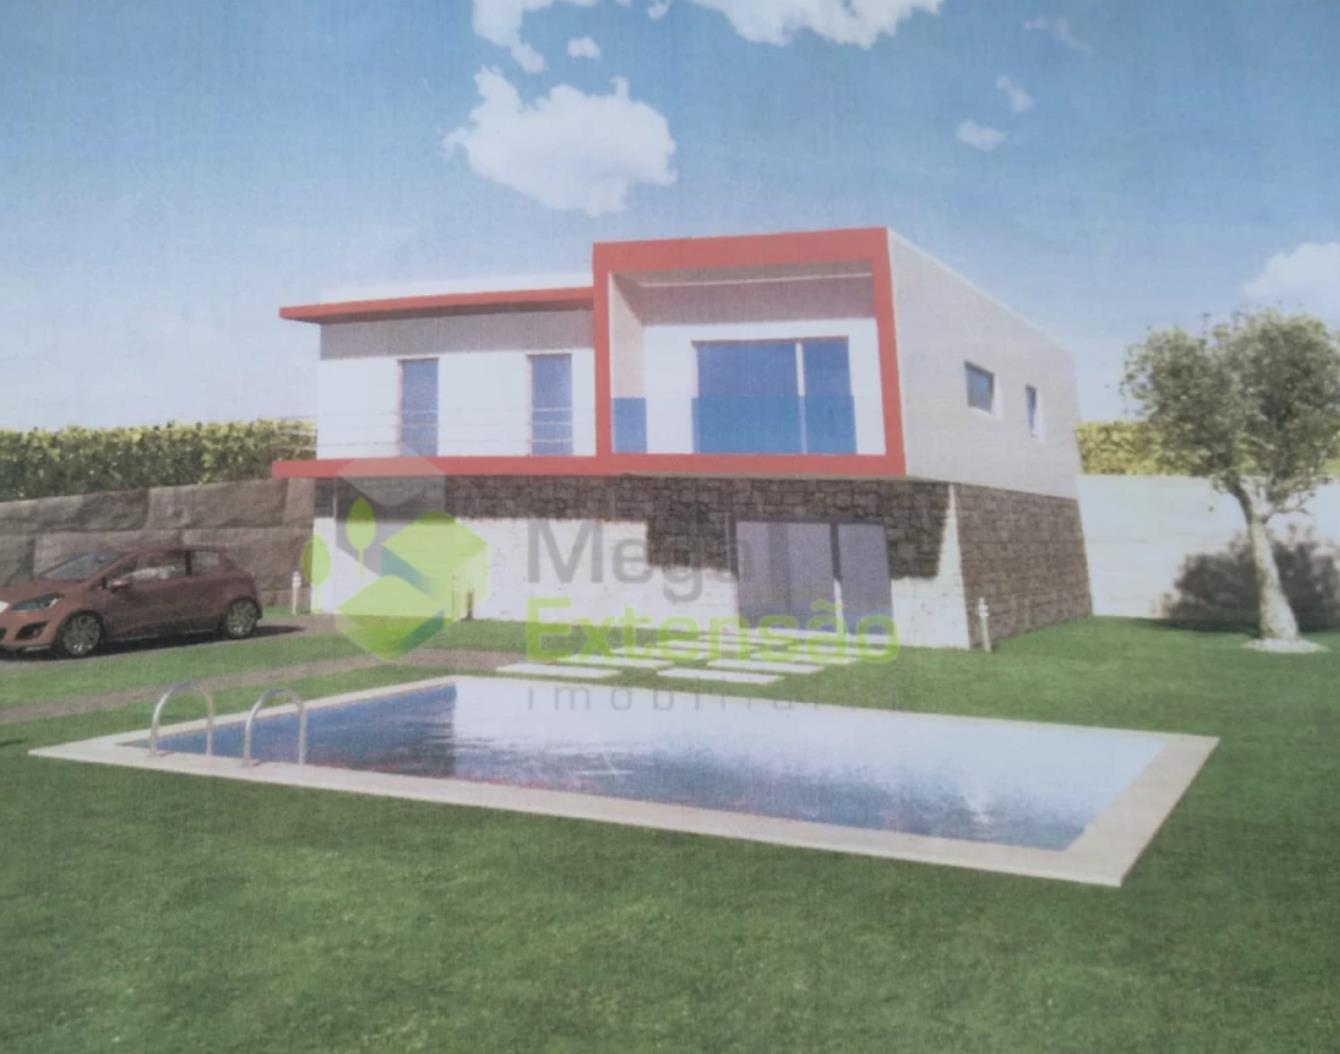 3 bedroom villa, under construction, near Cadaval, with garage and patio. Countryside view